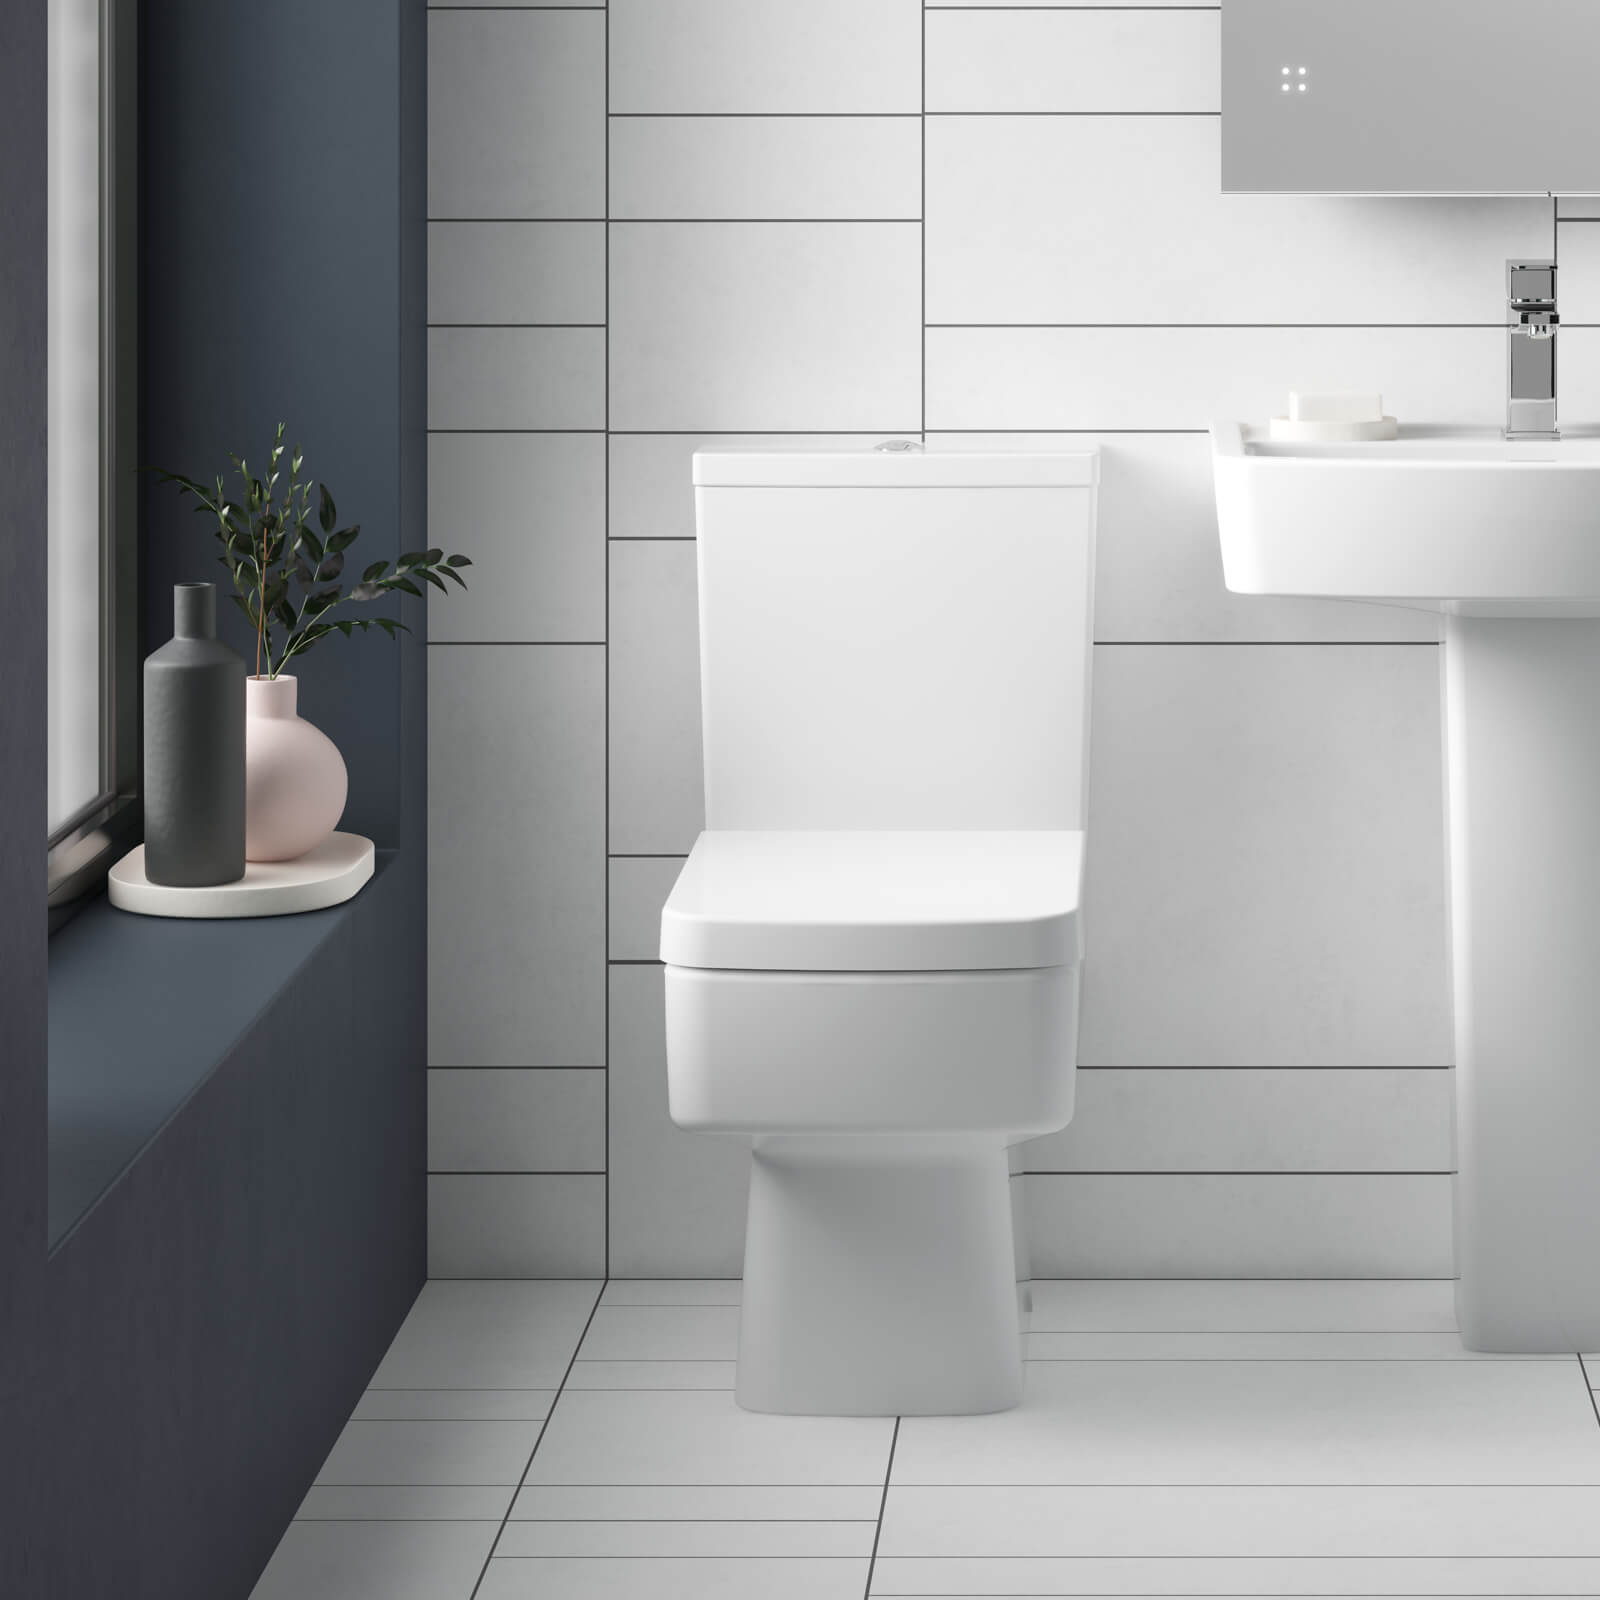 Explore our premium range of toilets featuring modern and traditional designs, water-saving technology, and soft-close seats. Perfect for any UK bathroom renovation.